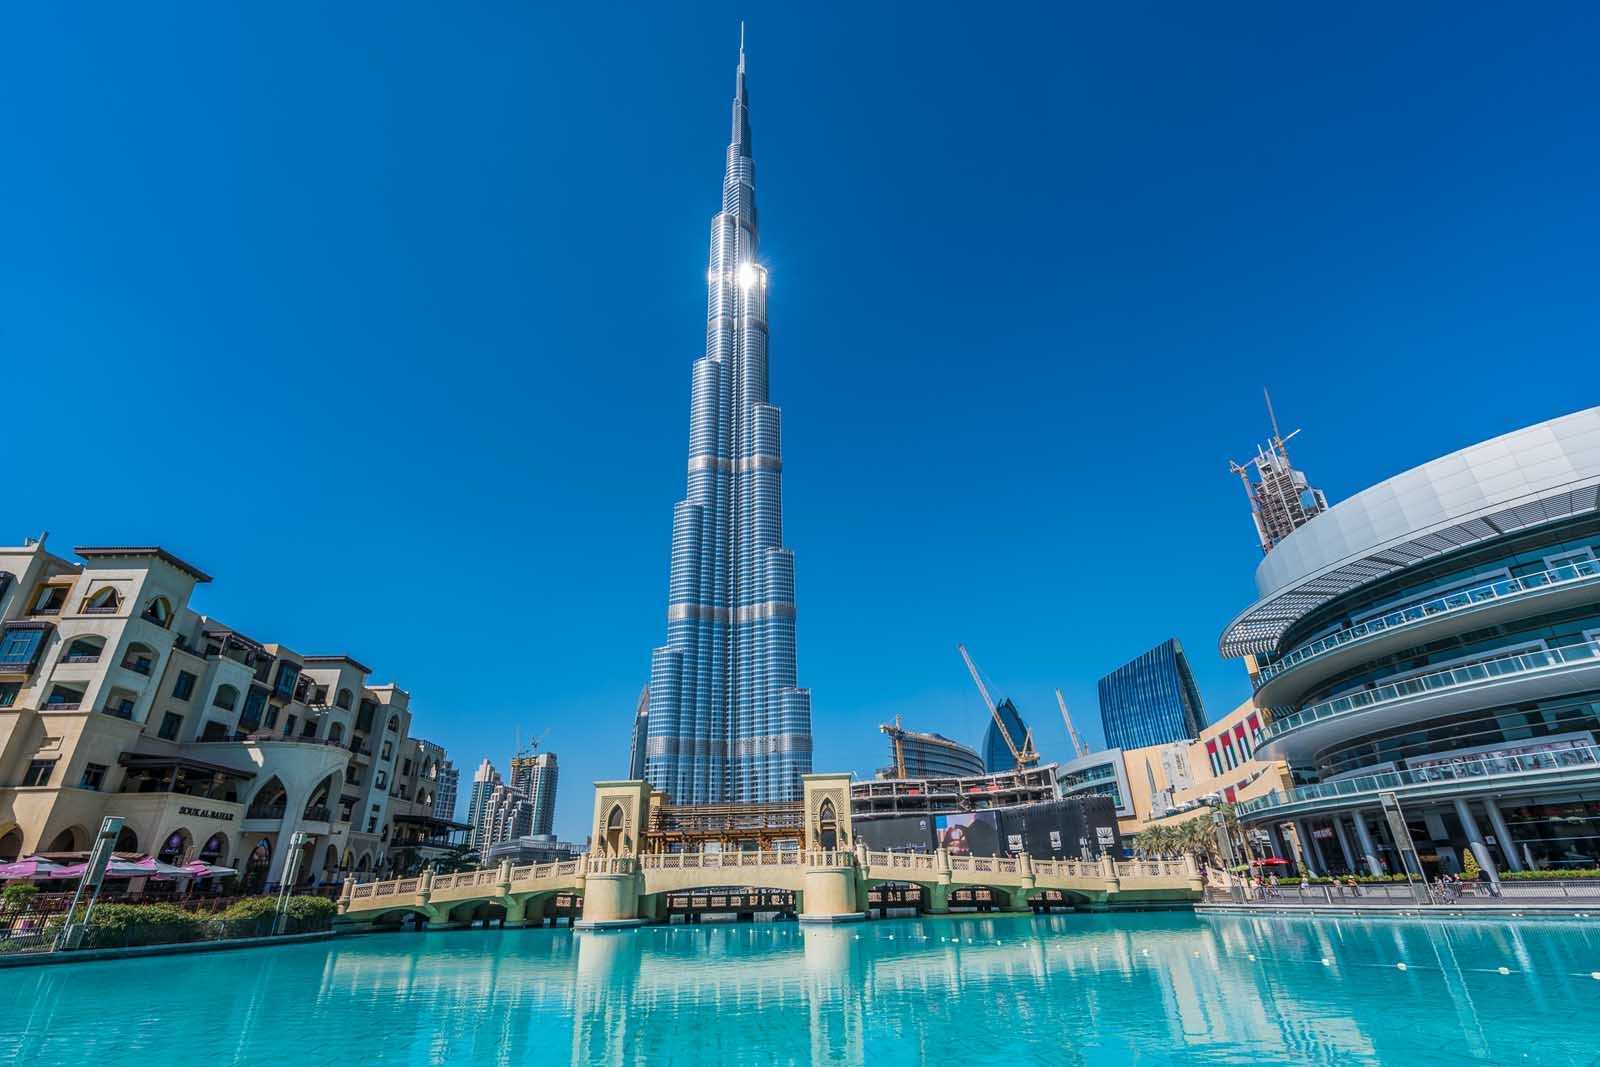 Most Popular things to do in Dubai